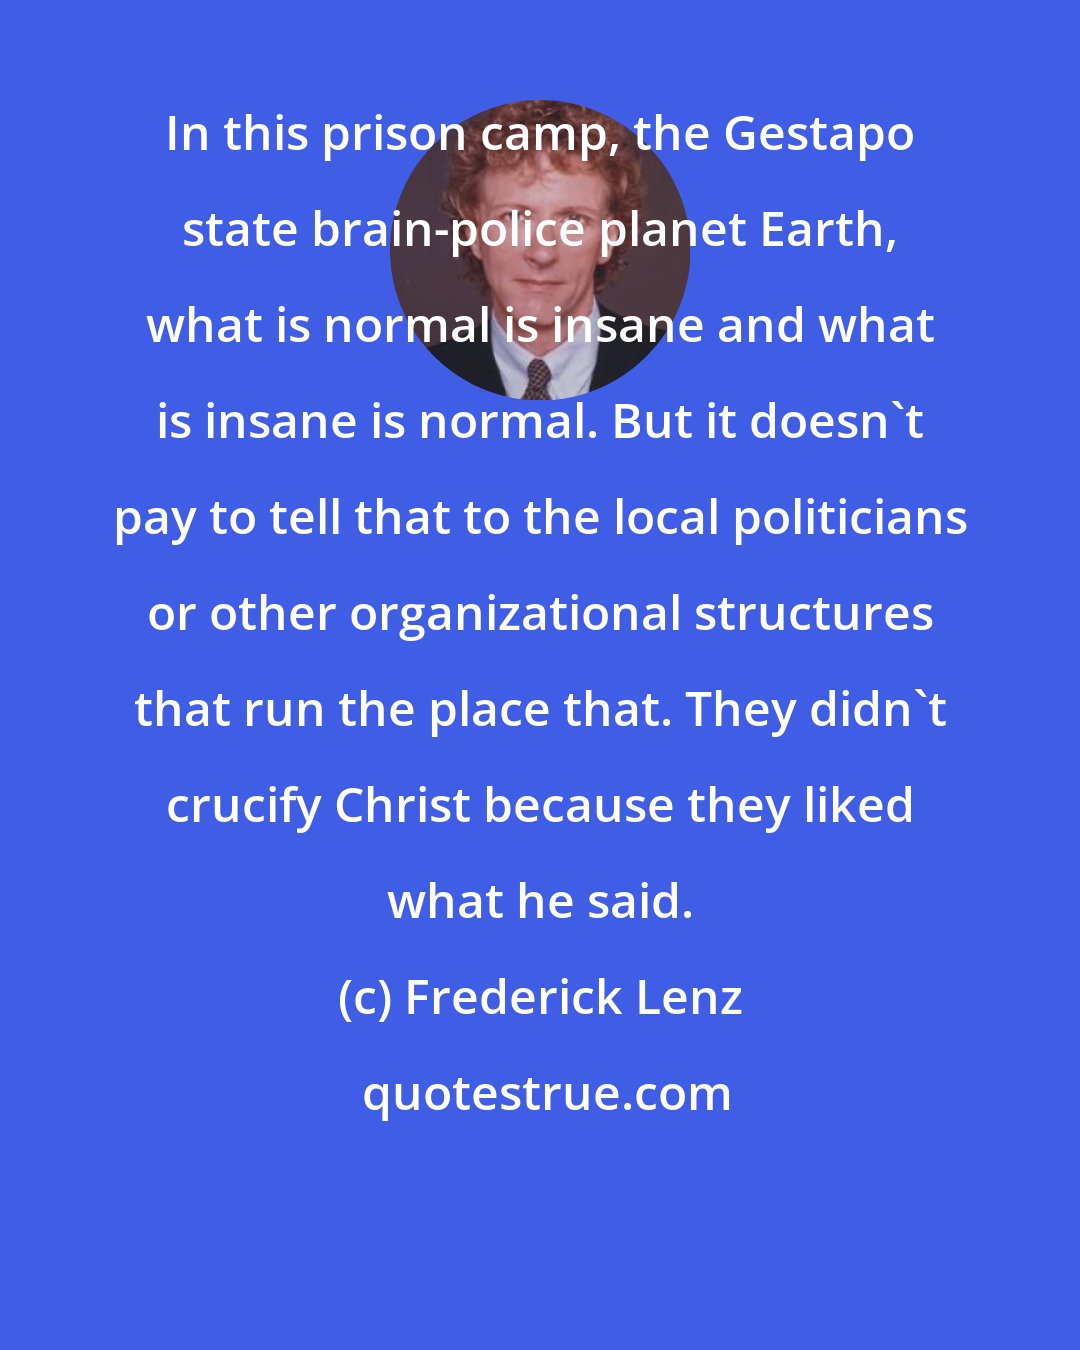 Frederick Lenz: In this prison camp, the Gestapo state brain-police planet Earth, what is normal is insane and what is insane is normal. But it doesn't pay to tell that to the local politicians or other organizational structures that run the place that. They didn't crucify Christ because they liked what he said.